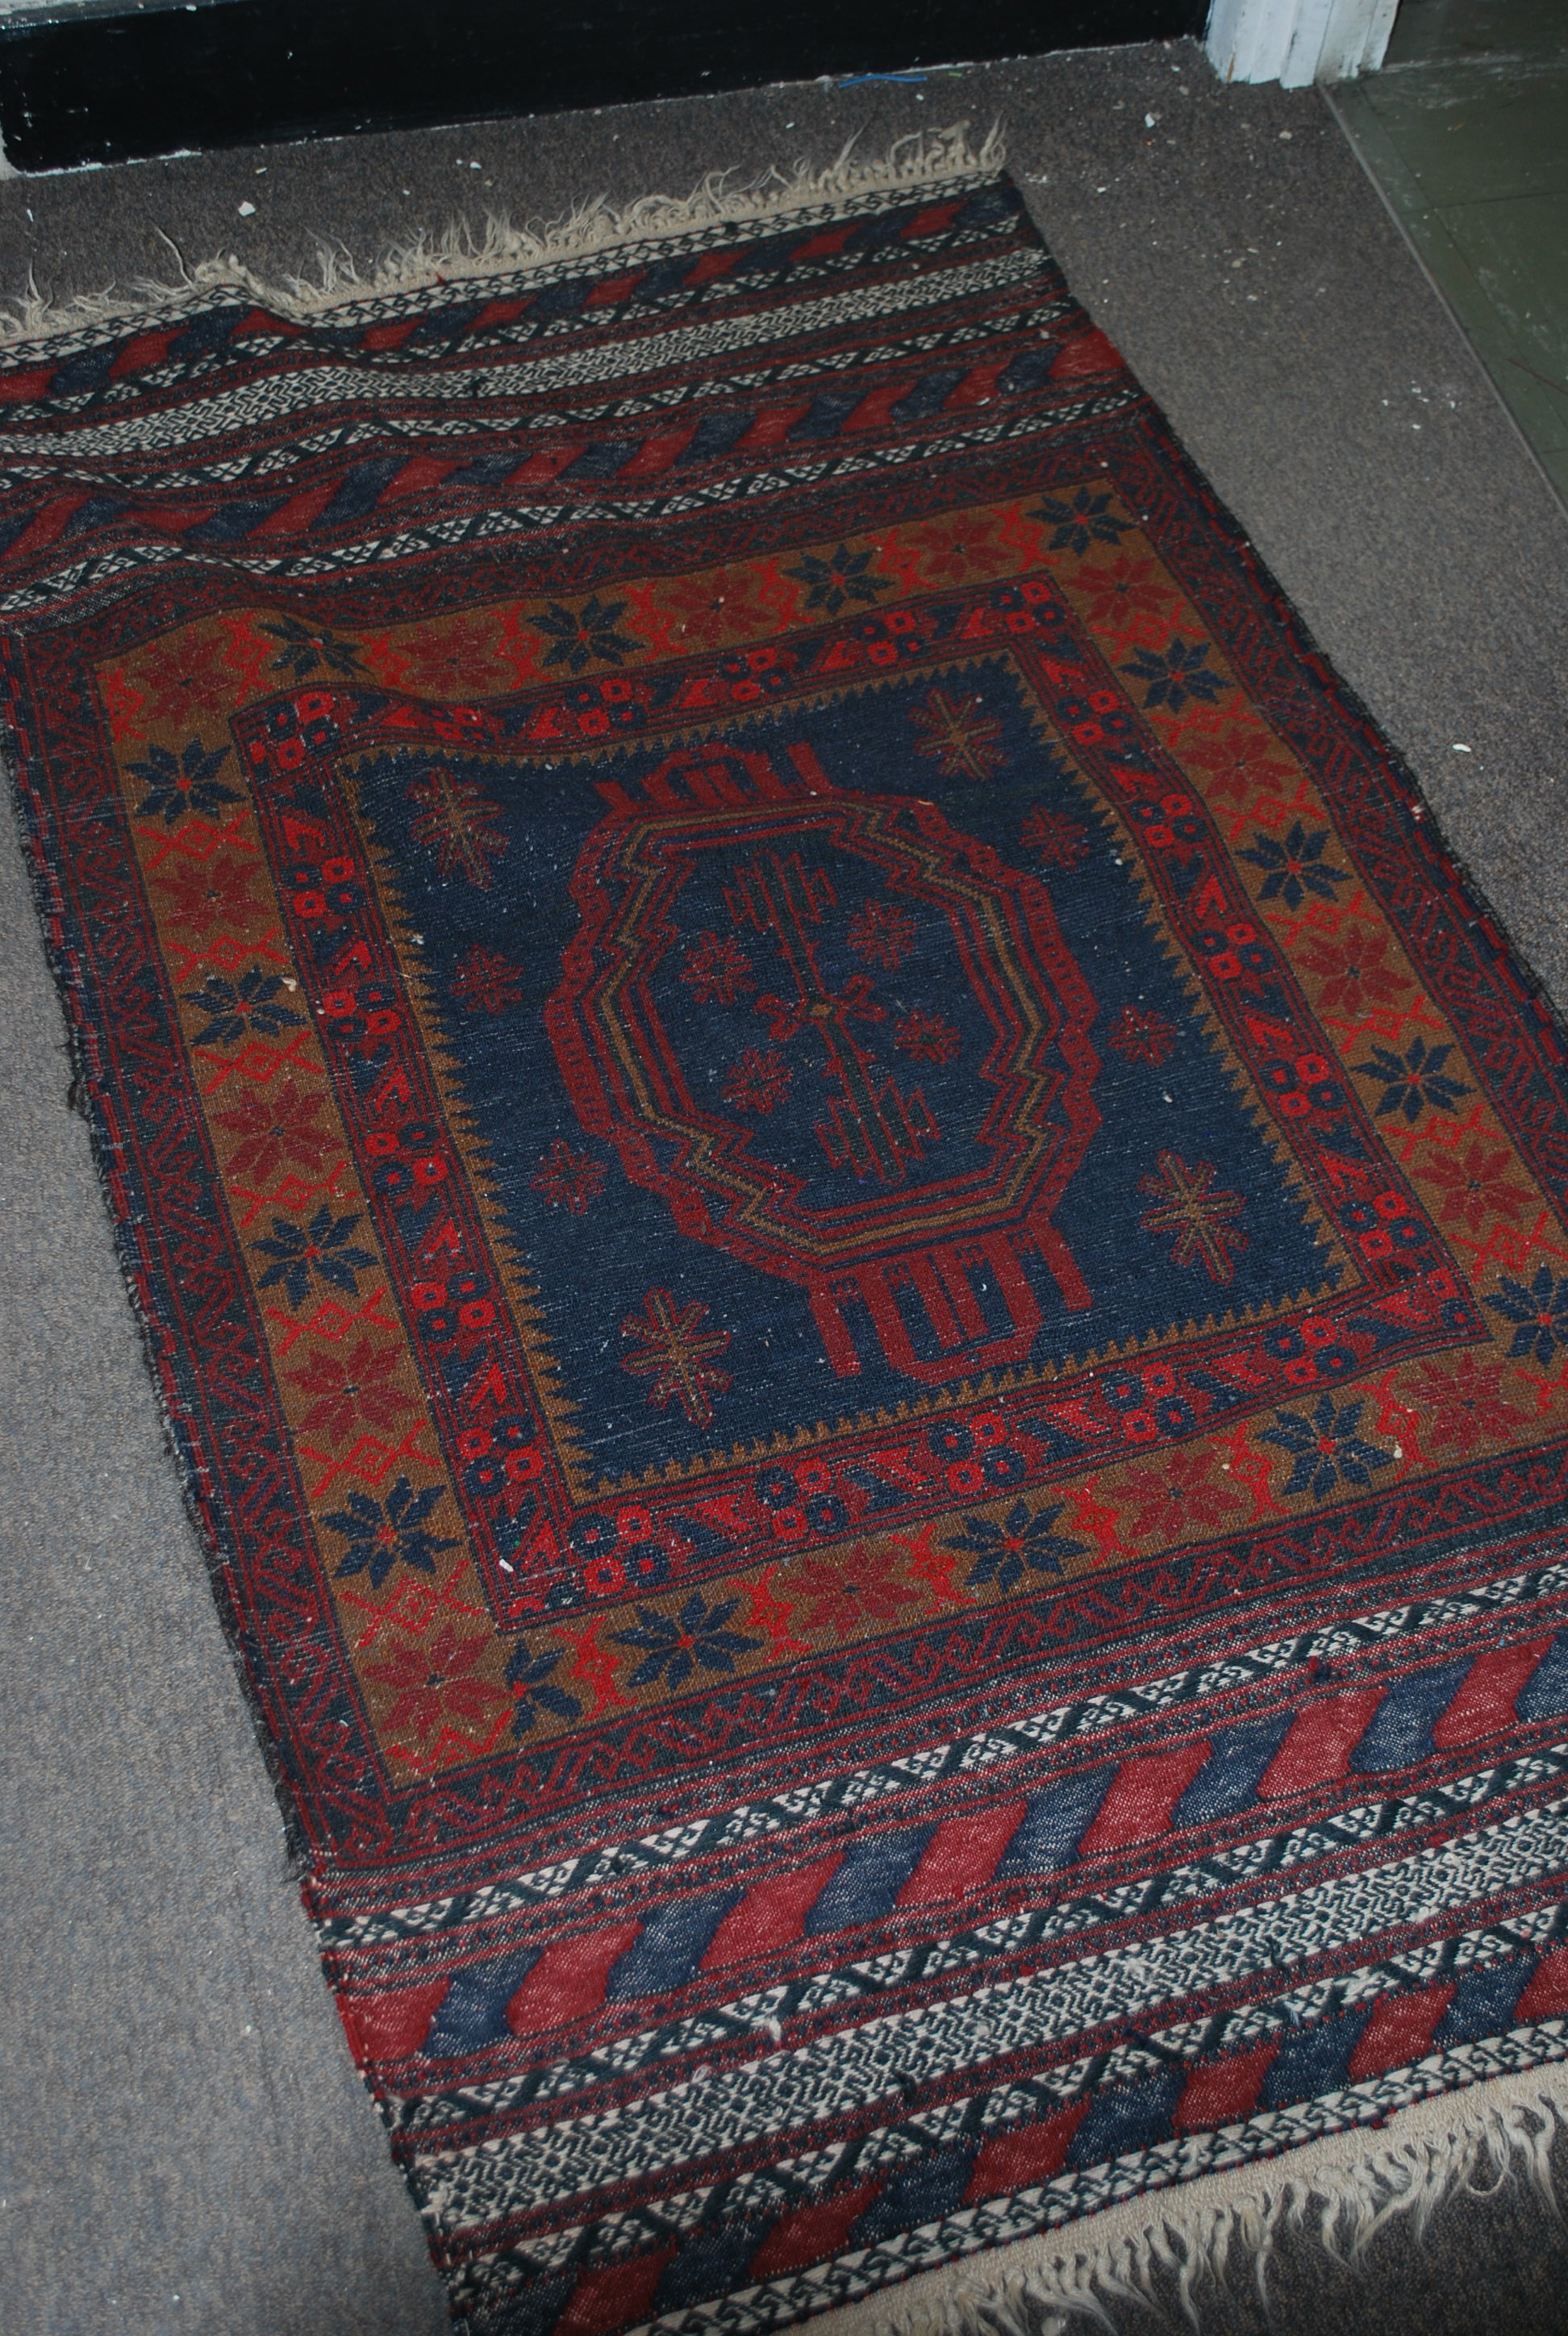 A Persian Islamic floor rug having a deep red and